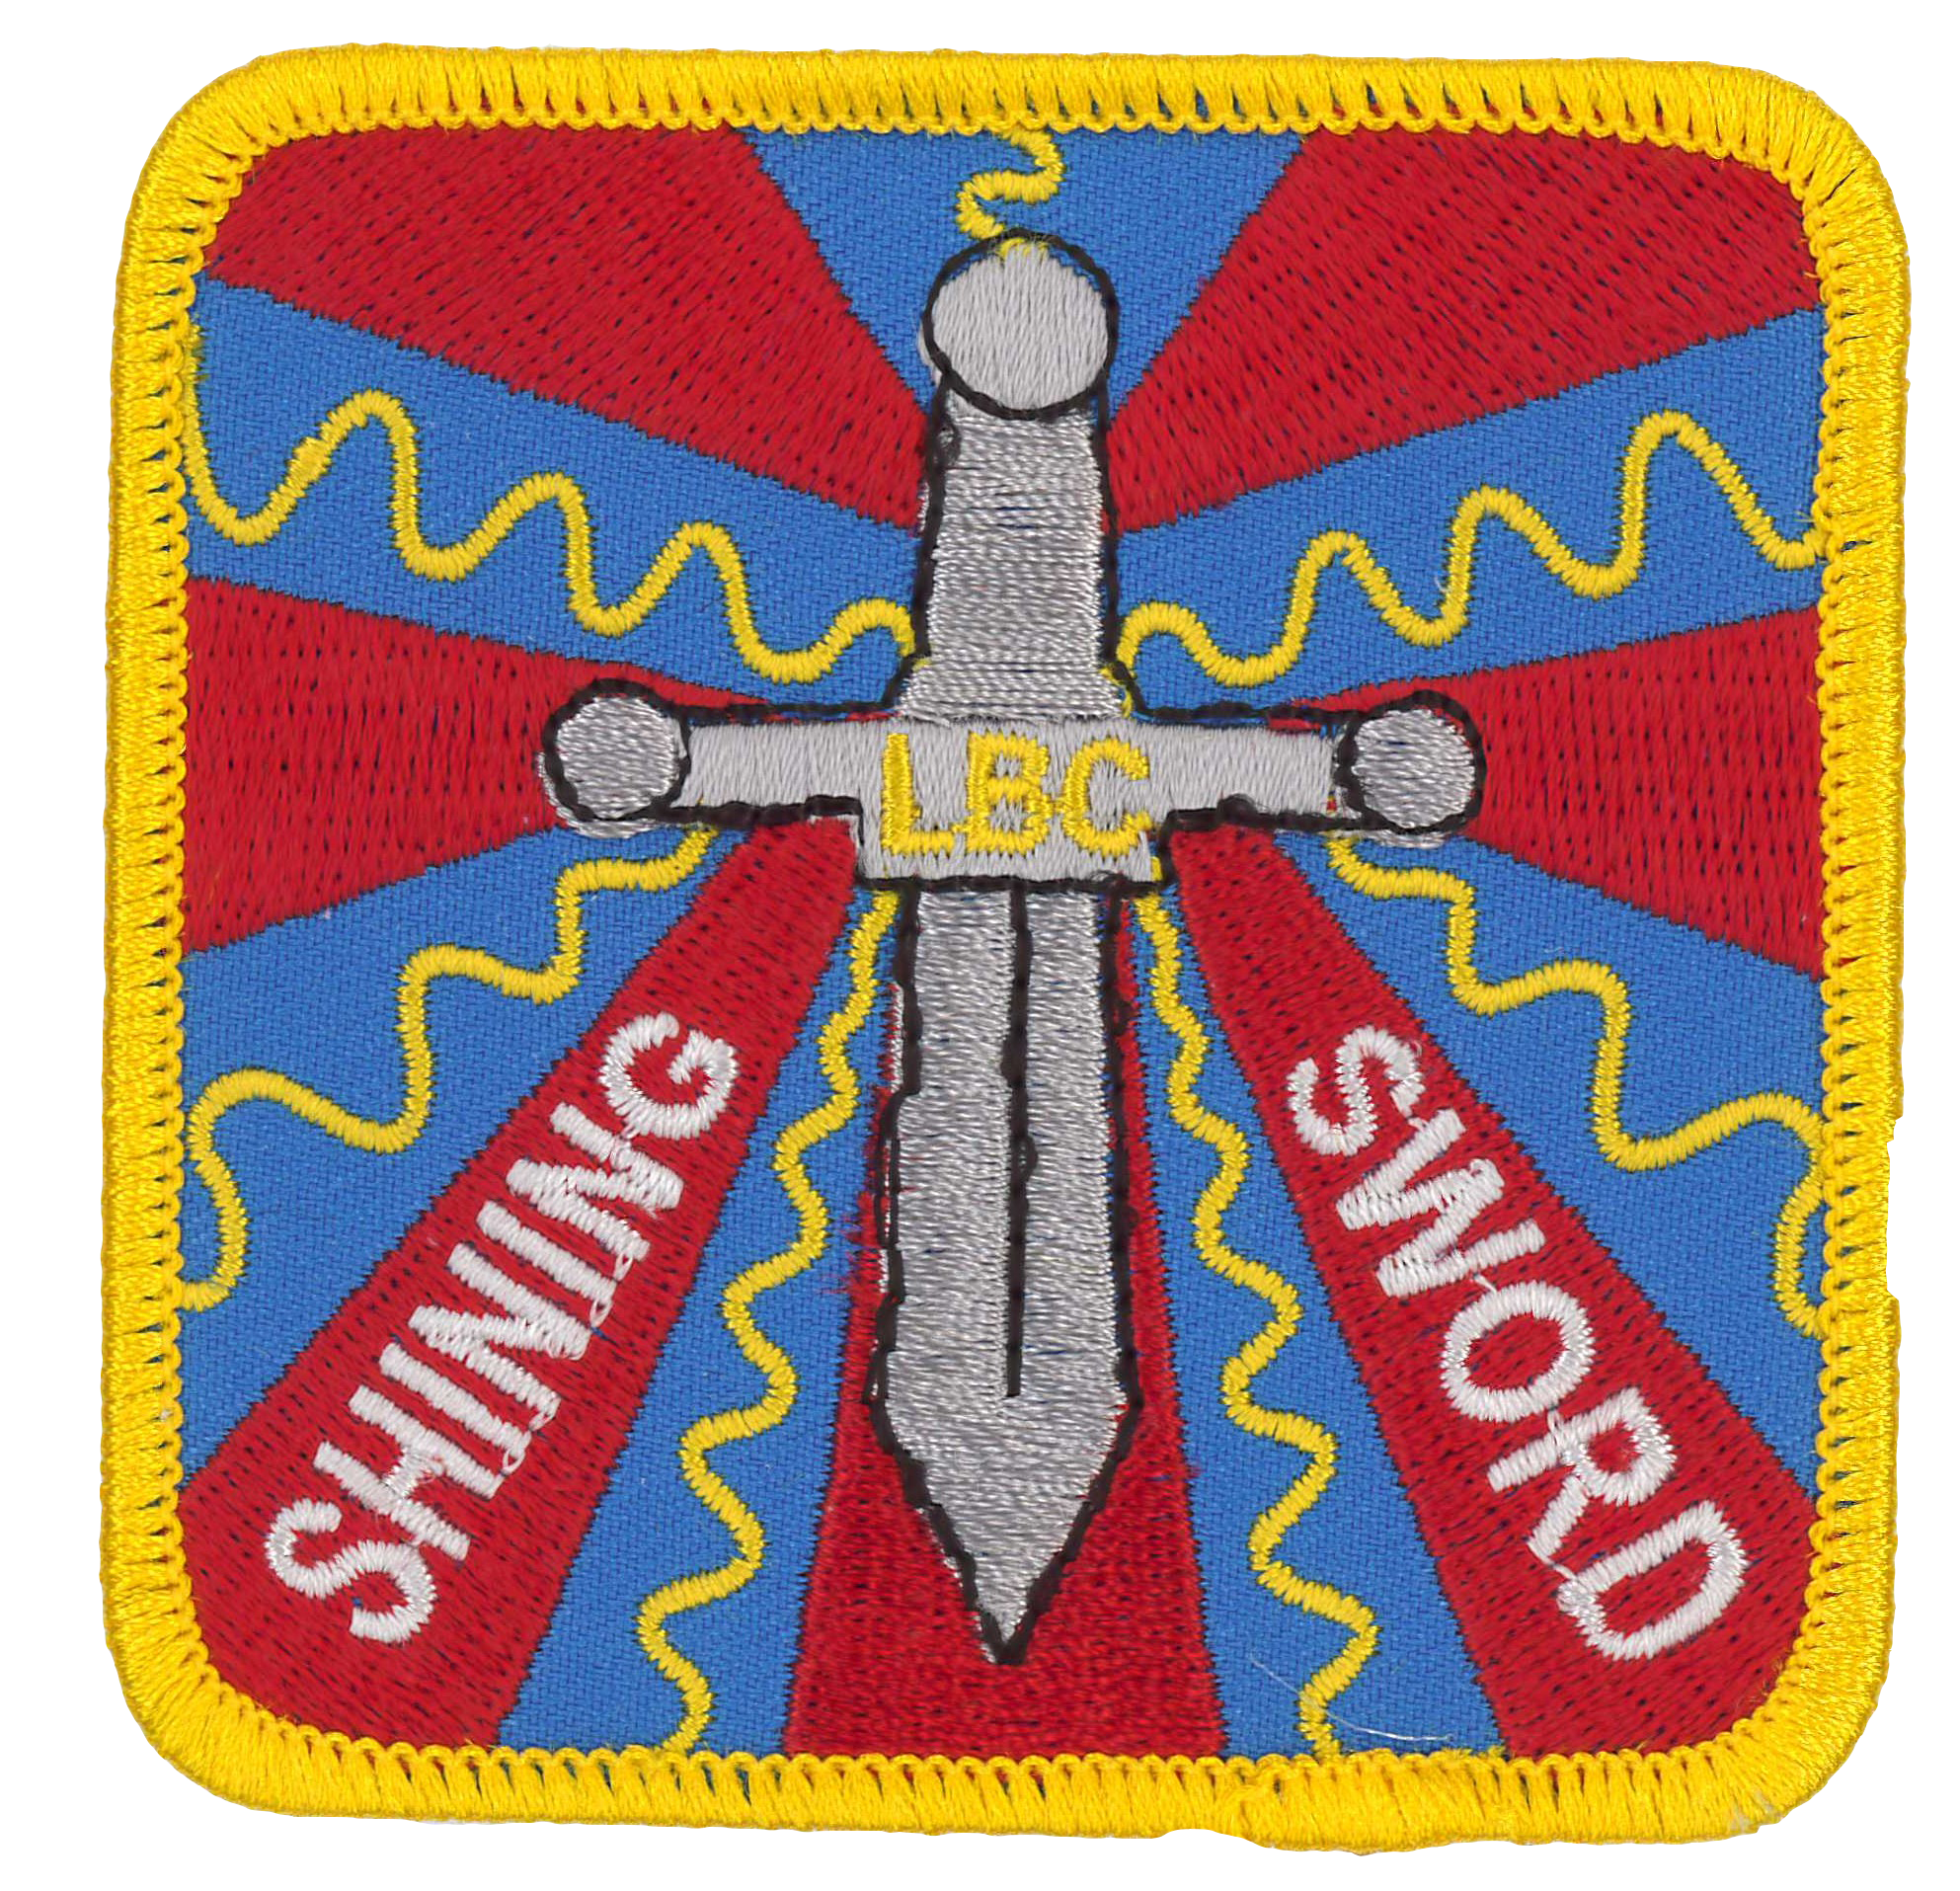 Gold Shining Sword Patch.png